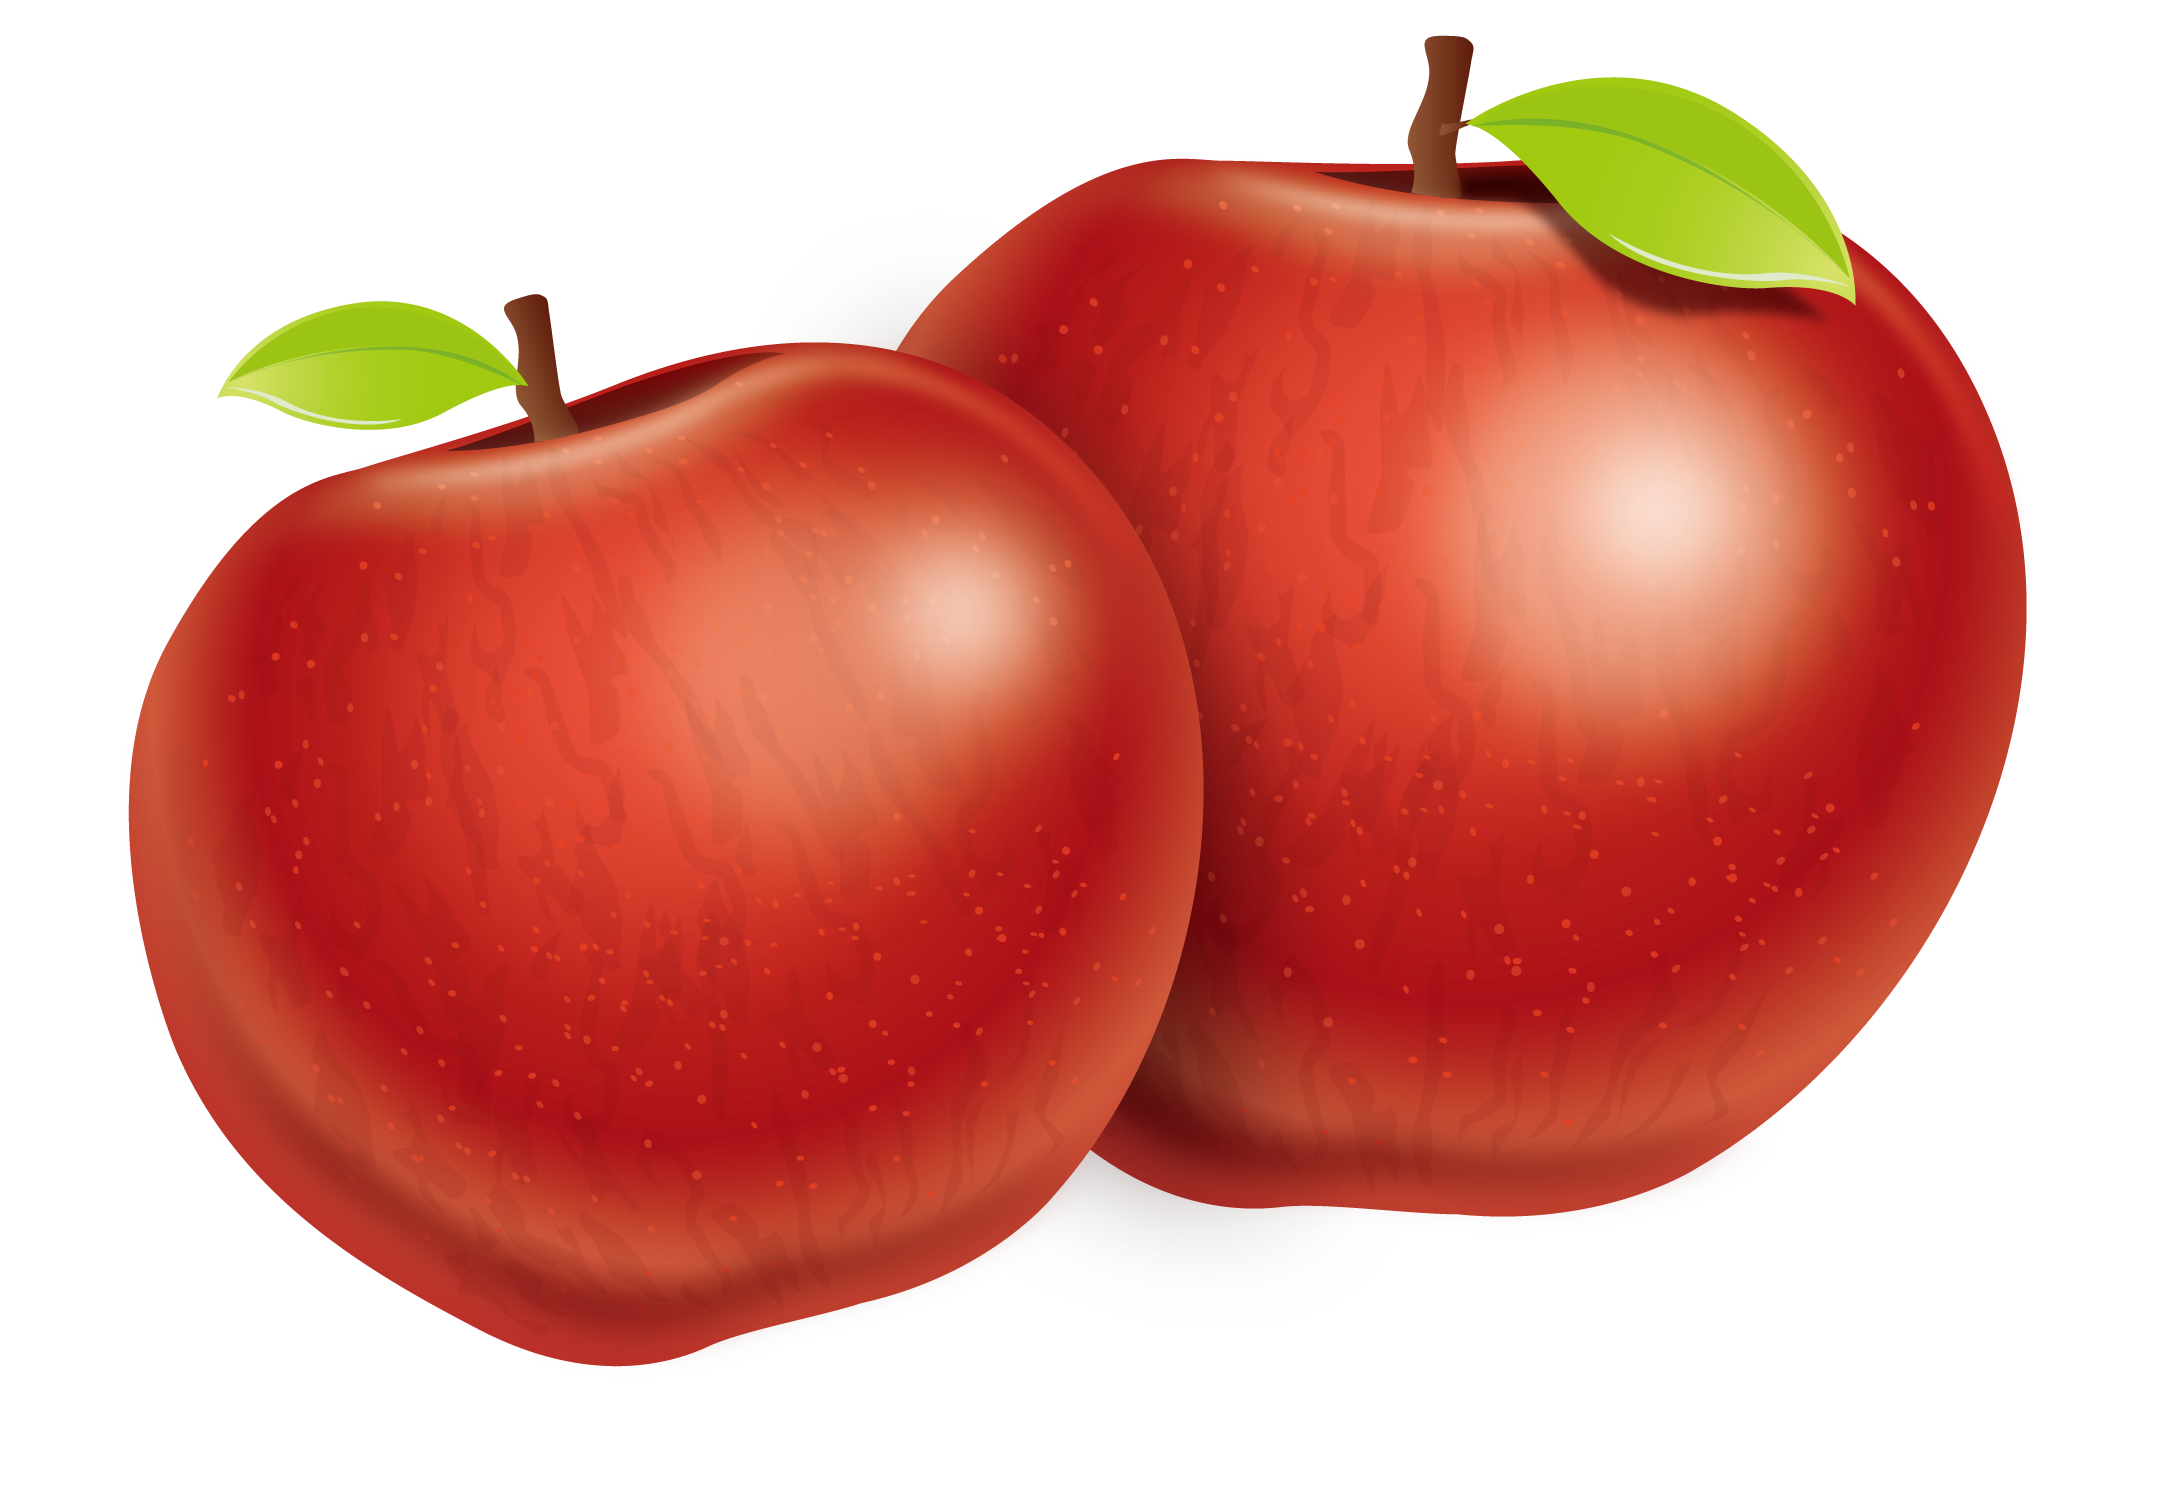 Tomato Apple Plum Two Fuji Vector Apples PNG Image